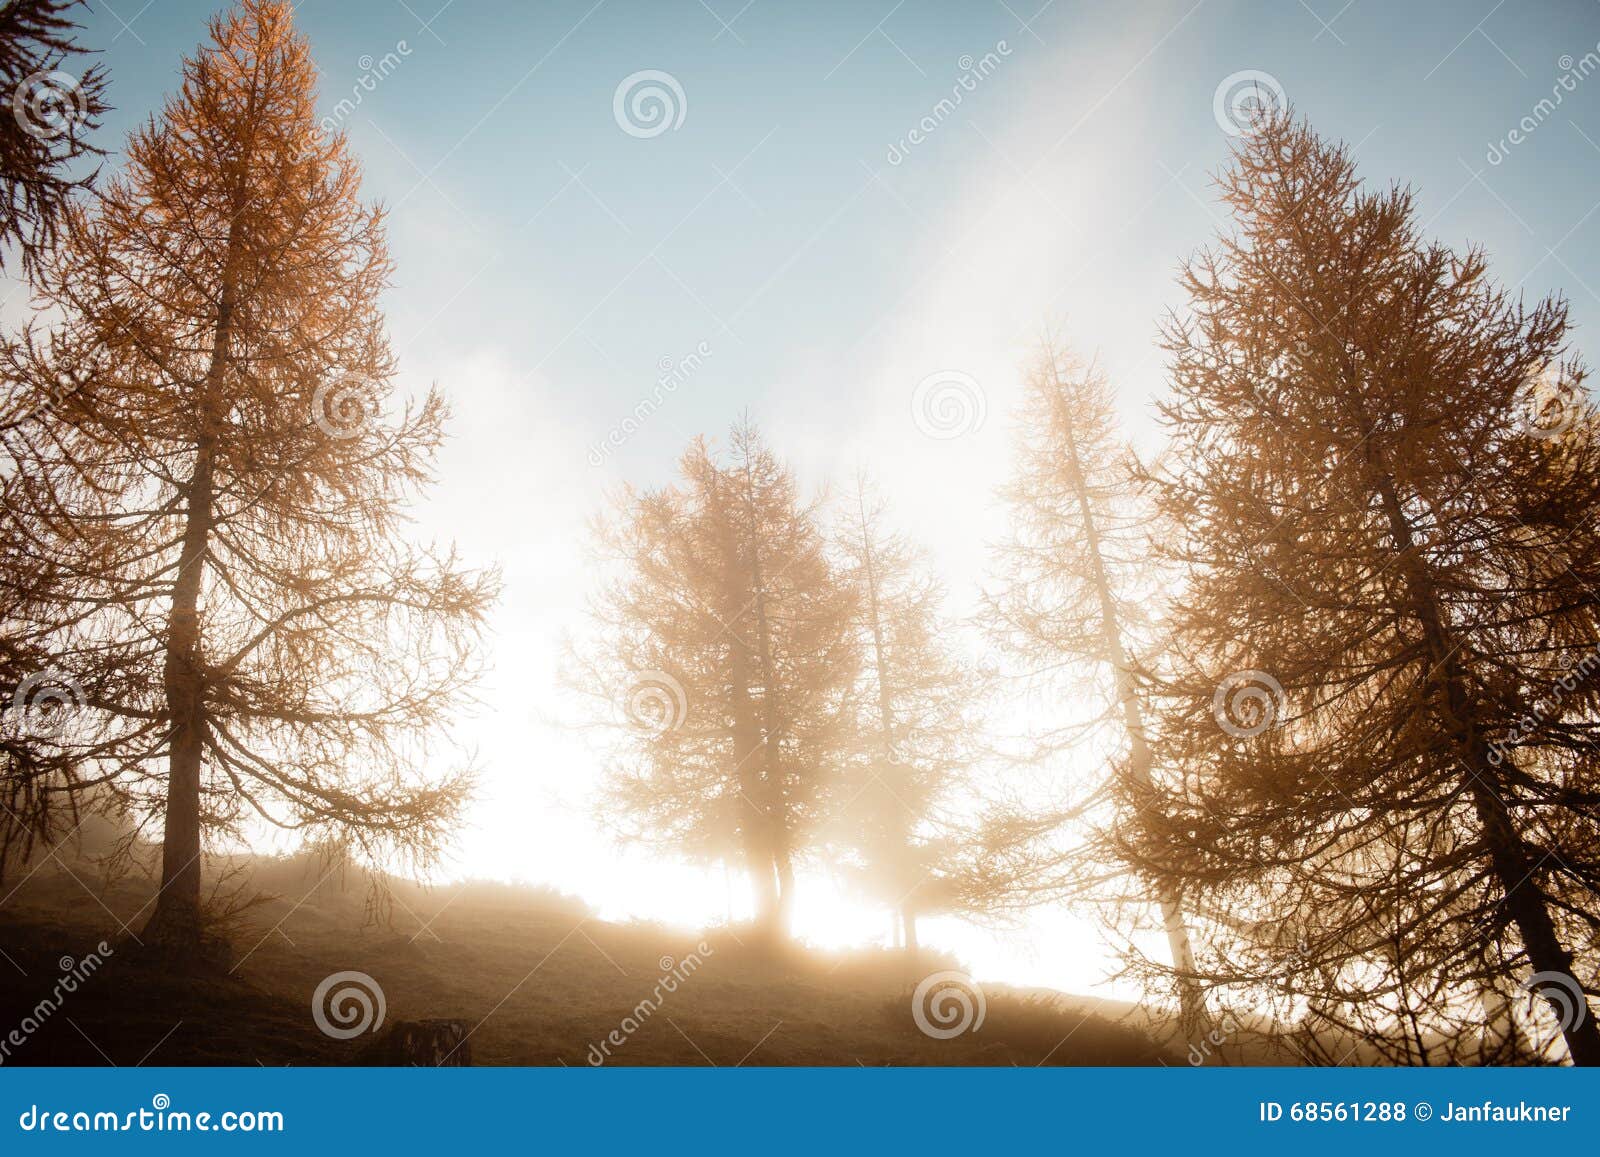 morning foggy moods in autumn larch trees